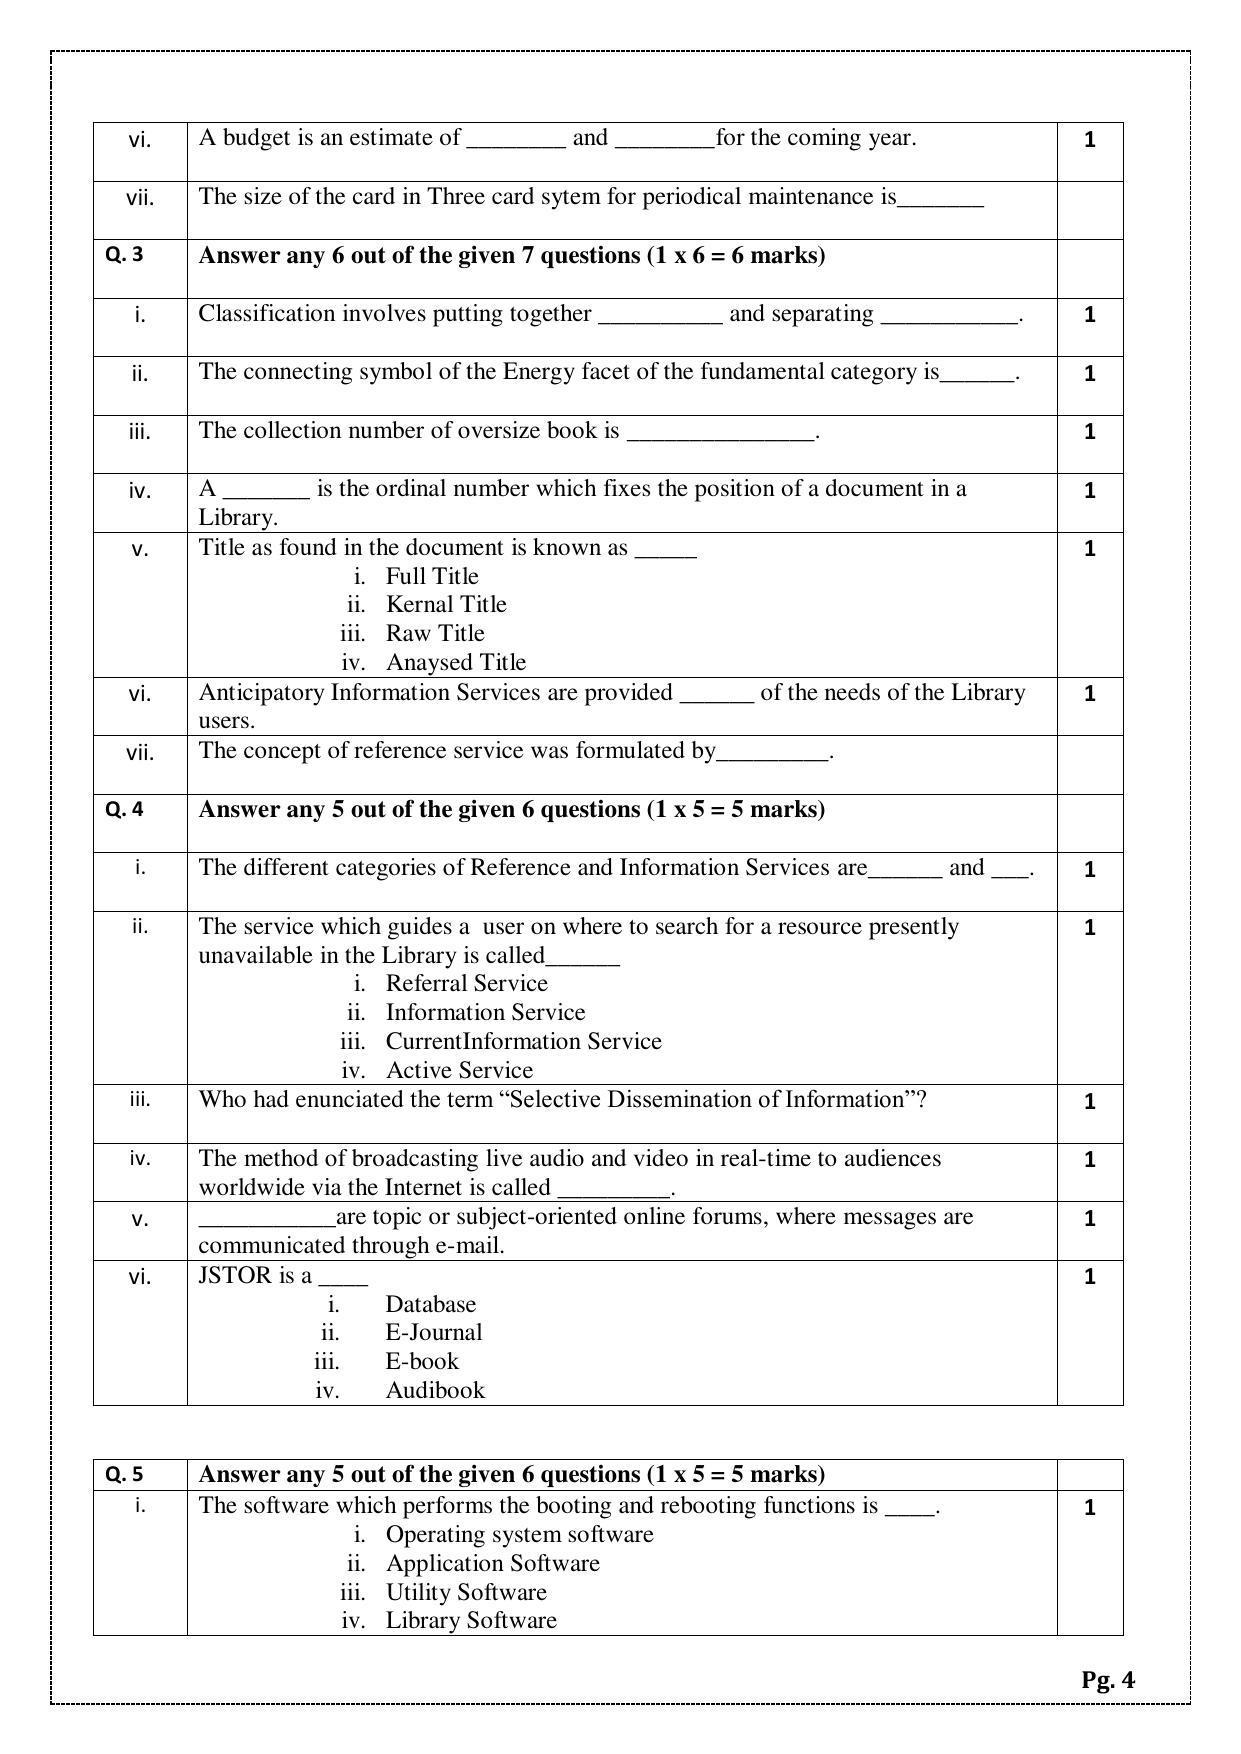 CBSE Class 12 Library & Information Science (Skill Education) Sample Papers 2023 - Page 4